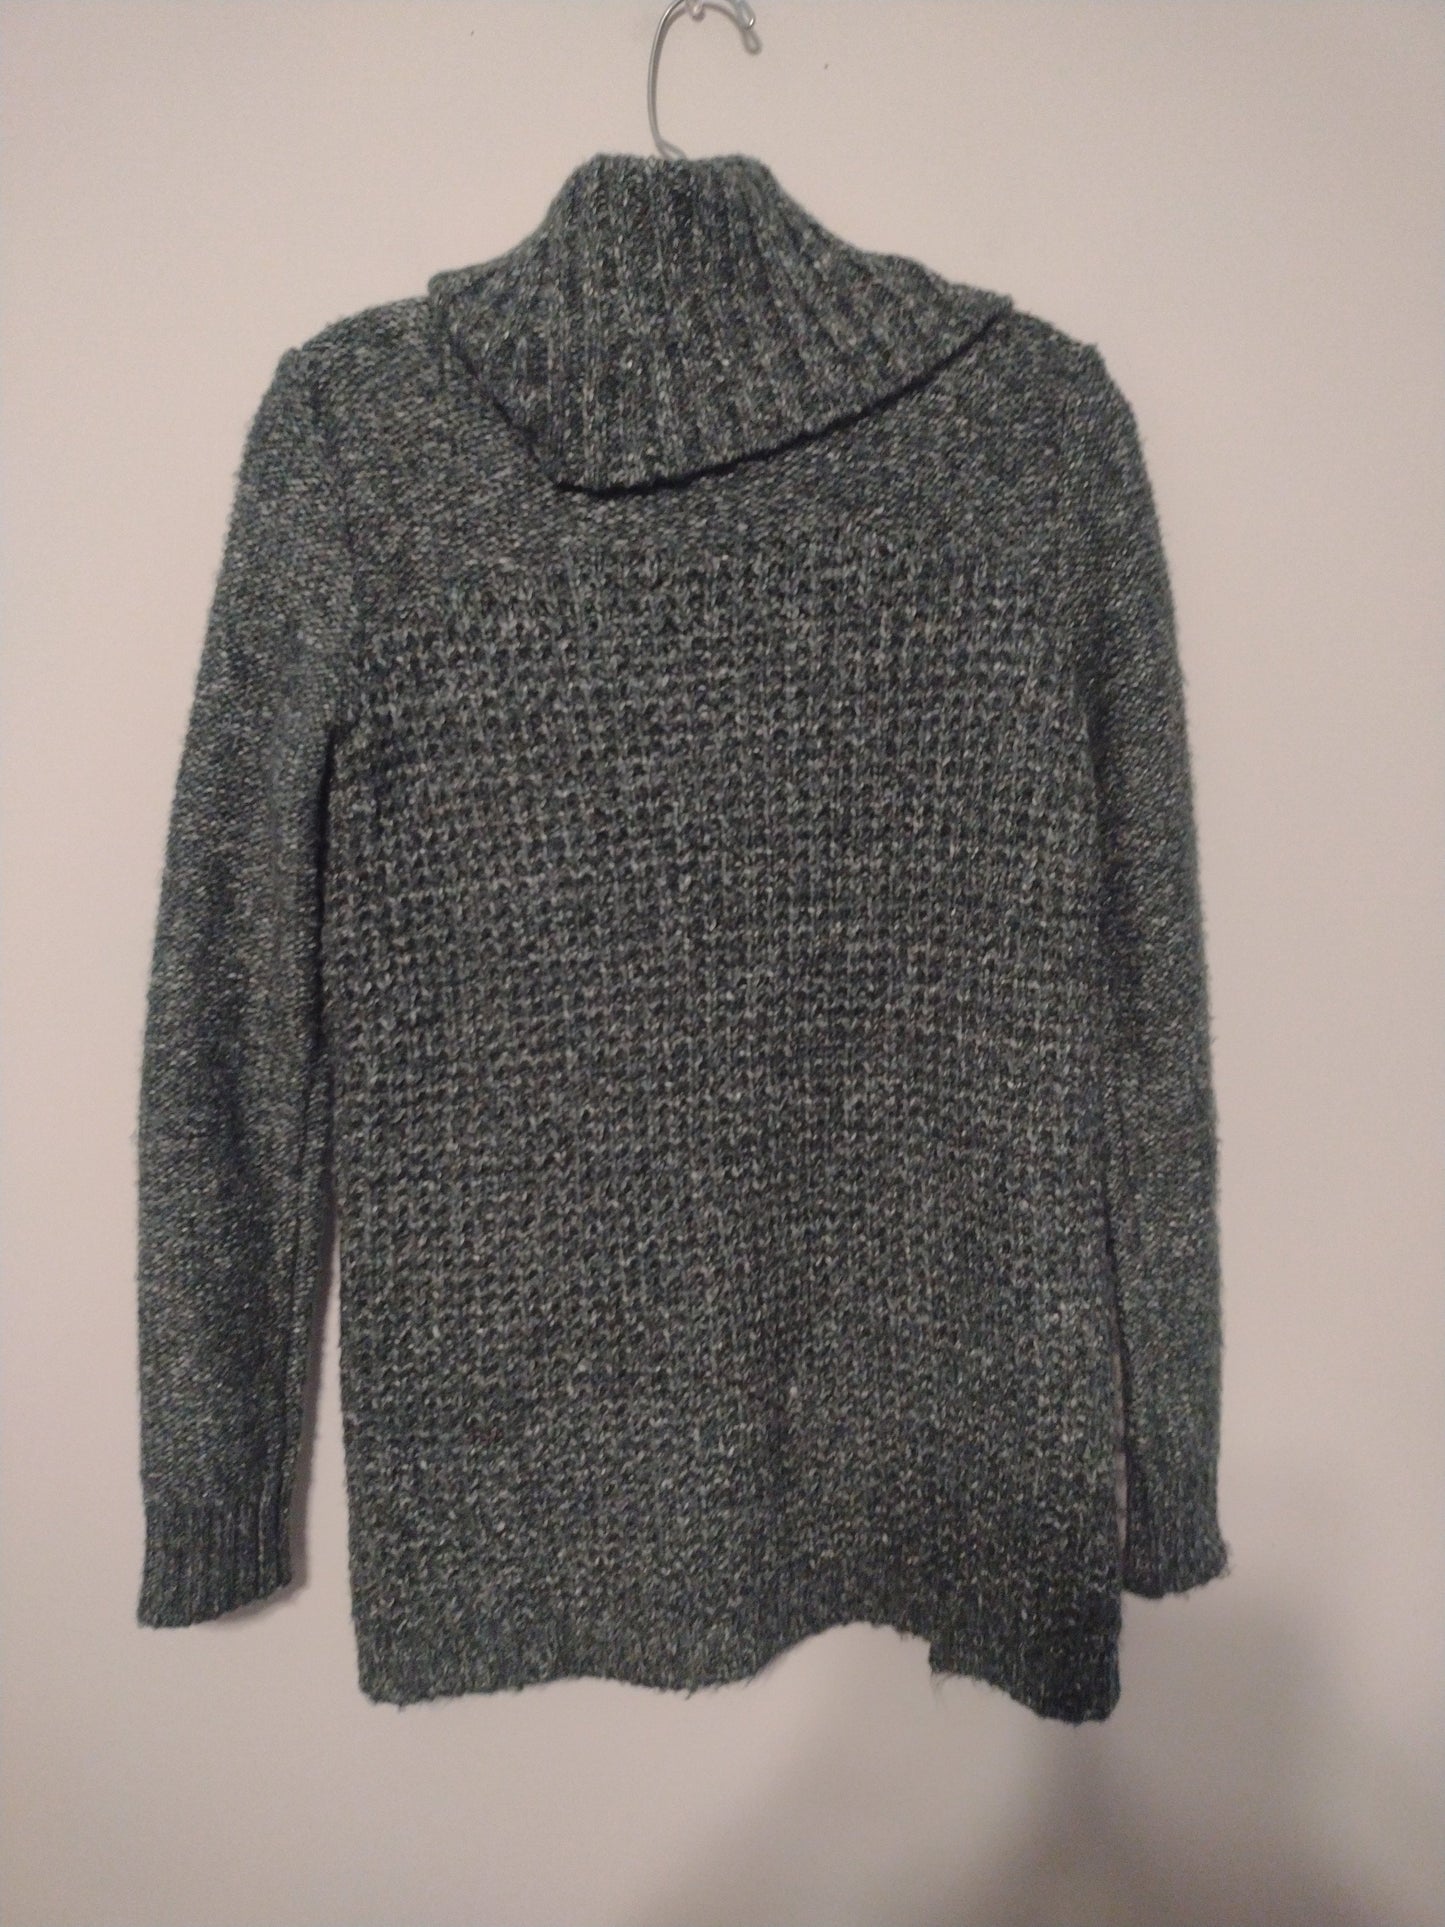 Sweater By Kensie  Size: Xs